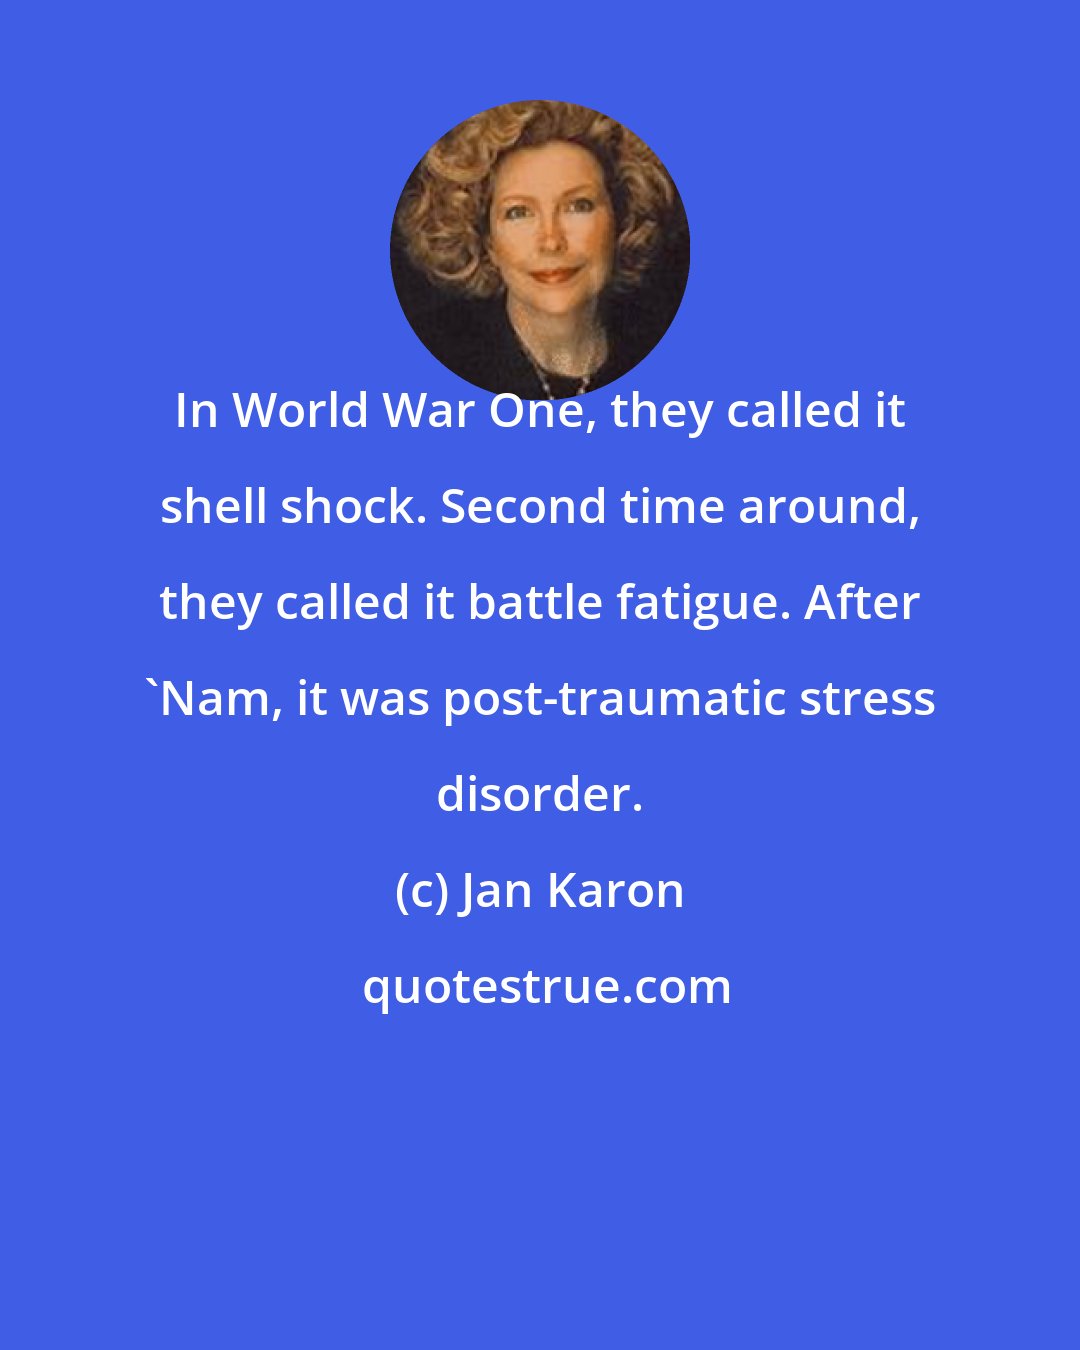 Jan Karon: In World War One, they called it shell shock. Second time around, they called it battle fatigue. After 'Nam, it was post-traumatic stress disorder.